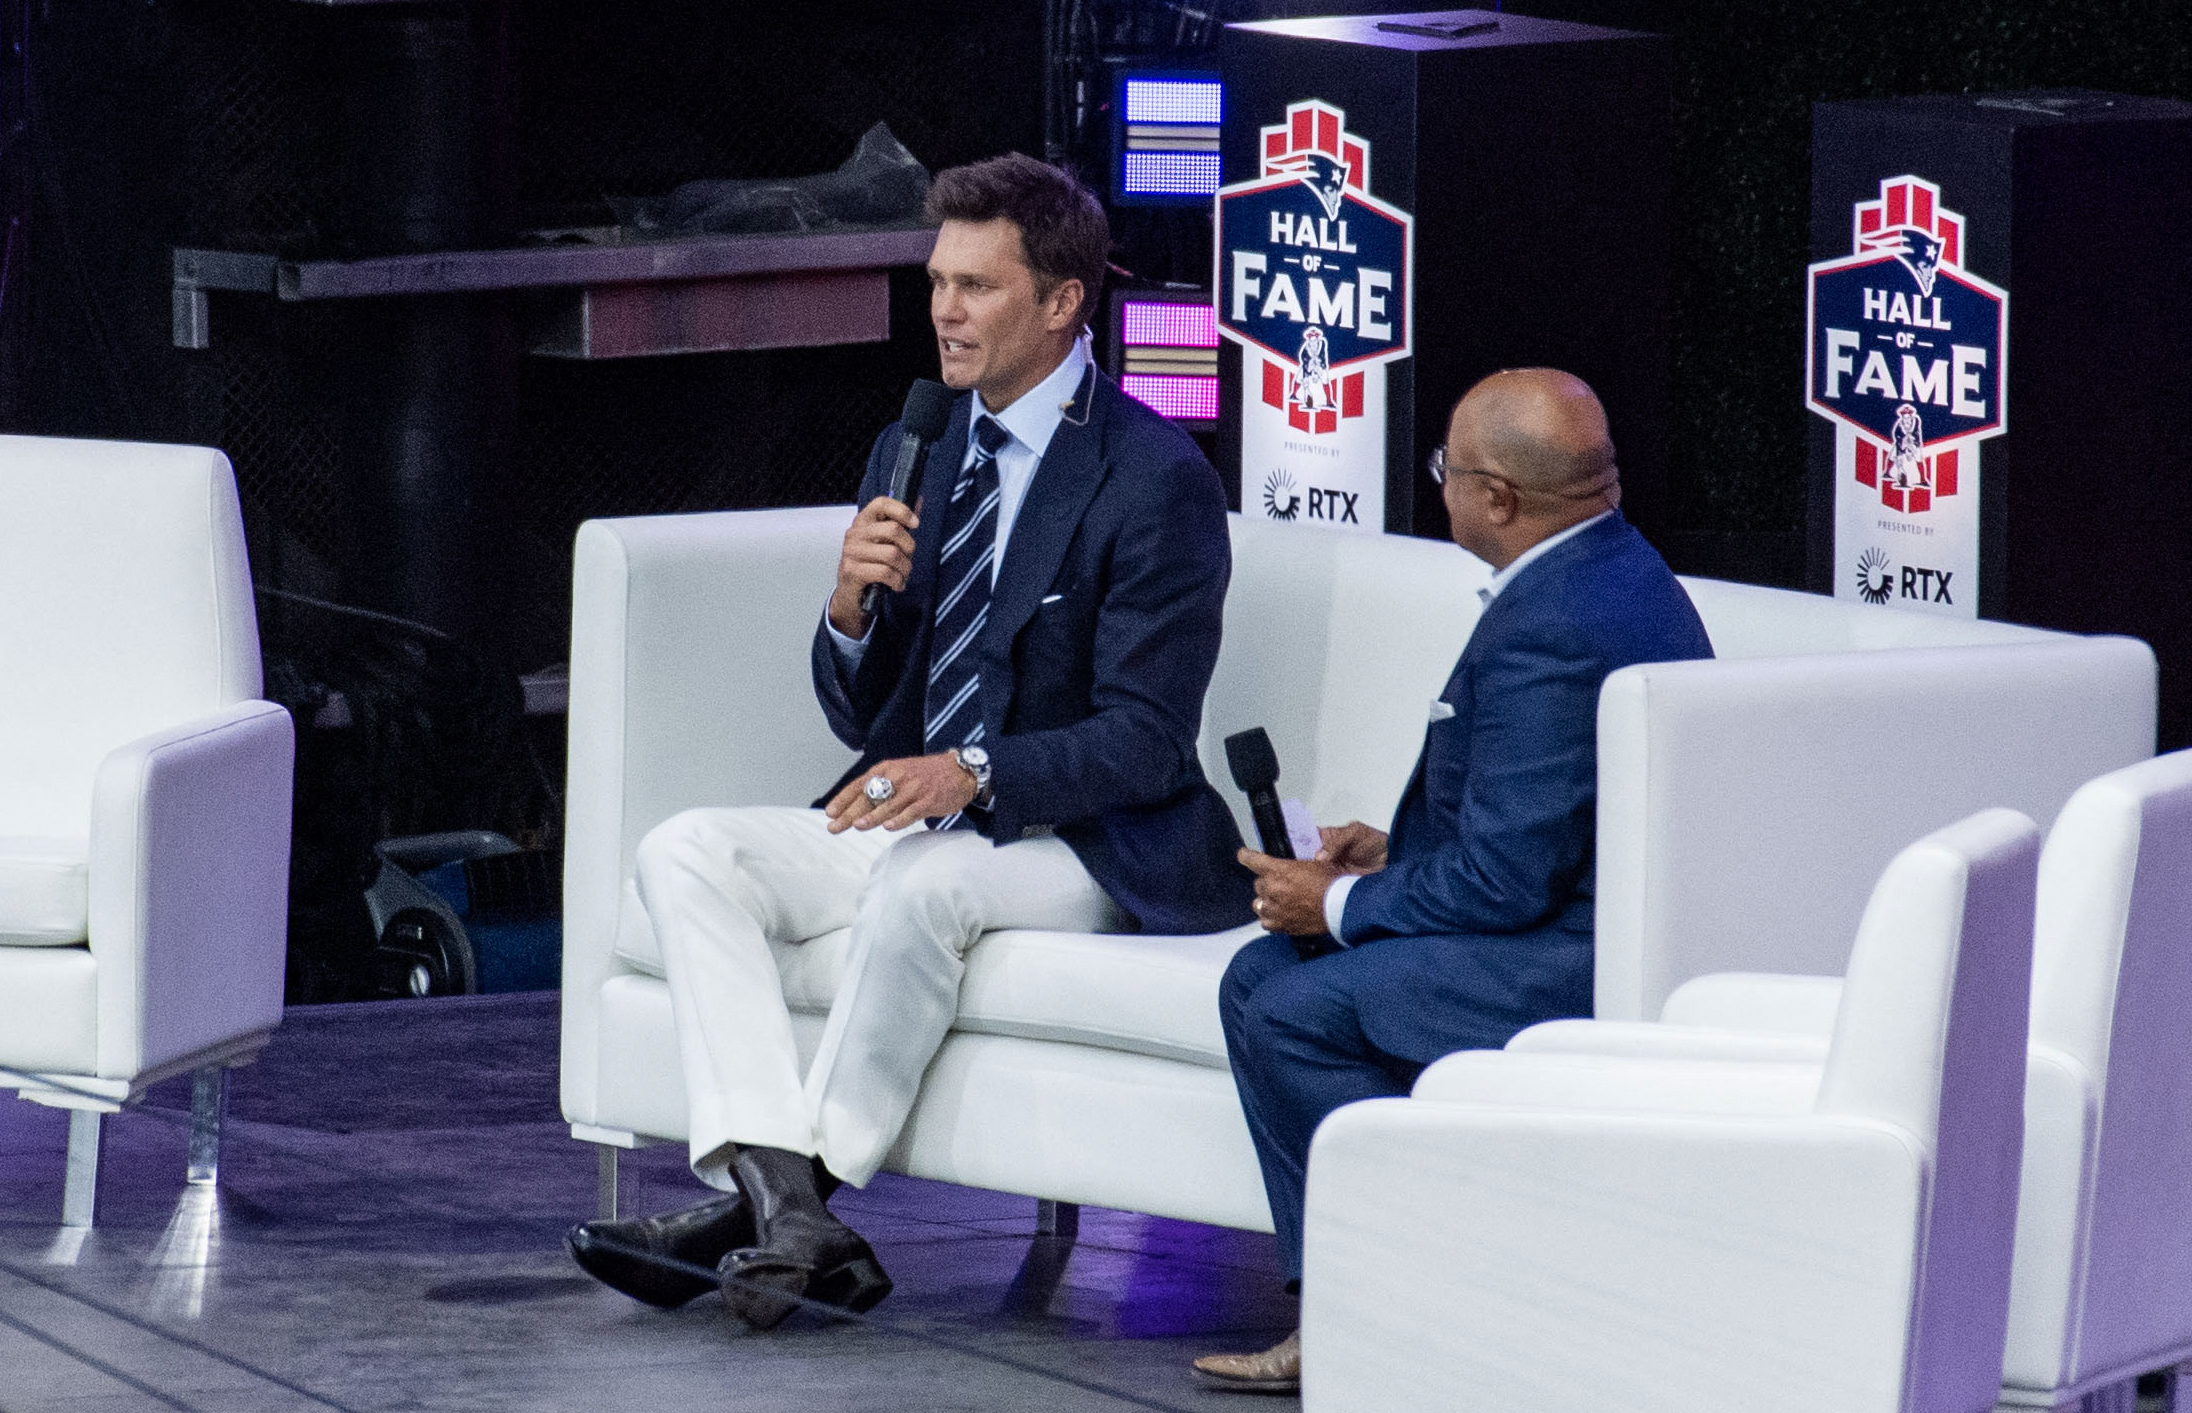 Scenes from Tom Brady's Patriots Hall of Fame induction